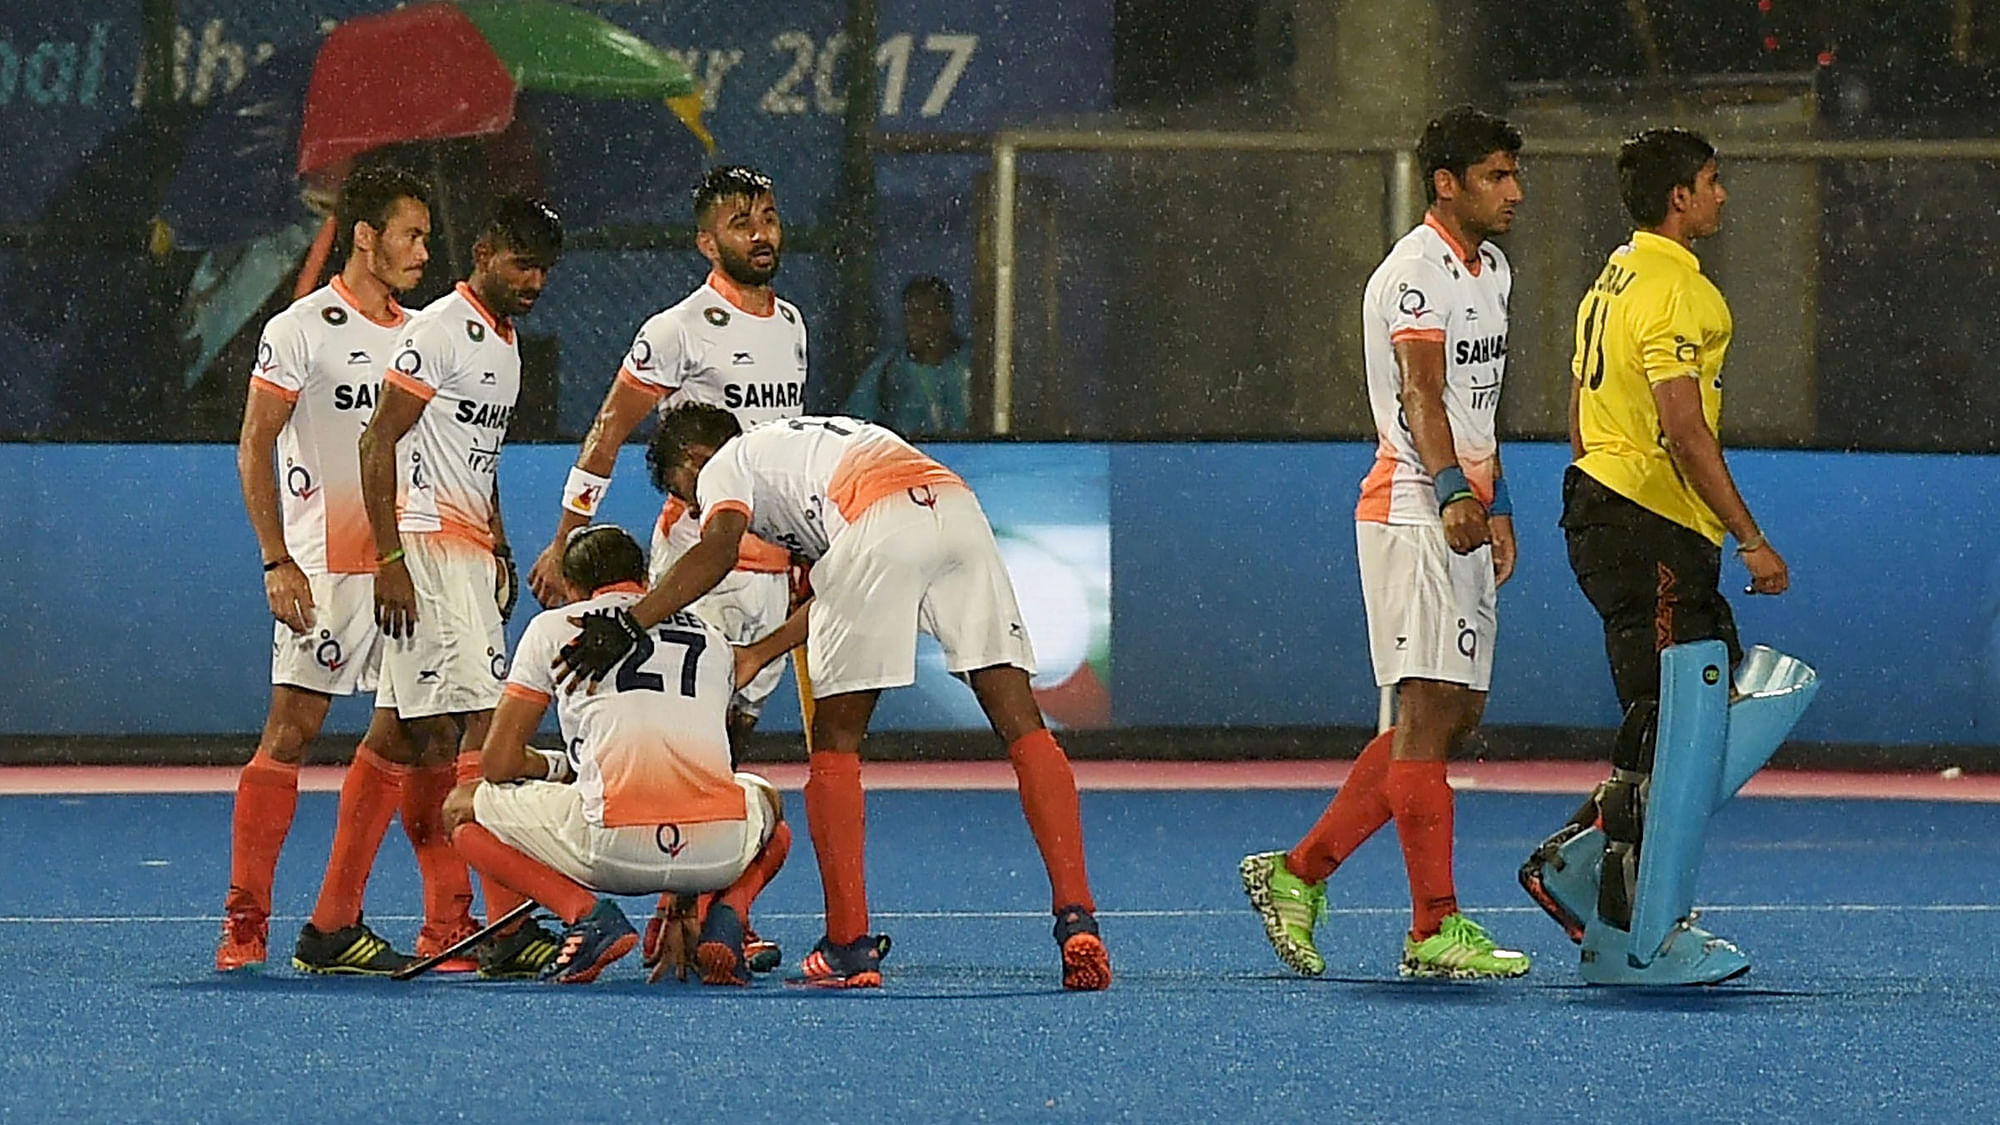 India lost 0-1 to Argentina in the semi-final match of the Hockey World League Final.&nbsp;